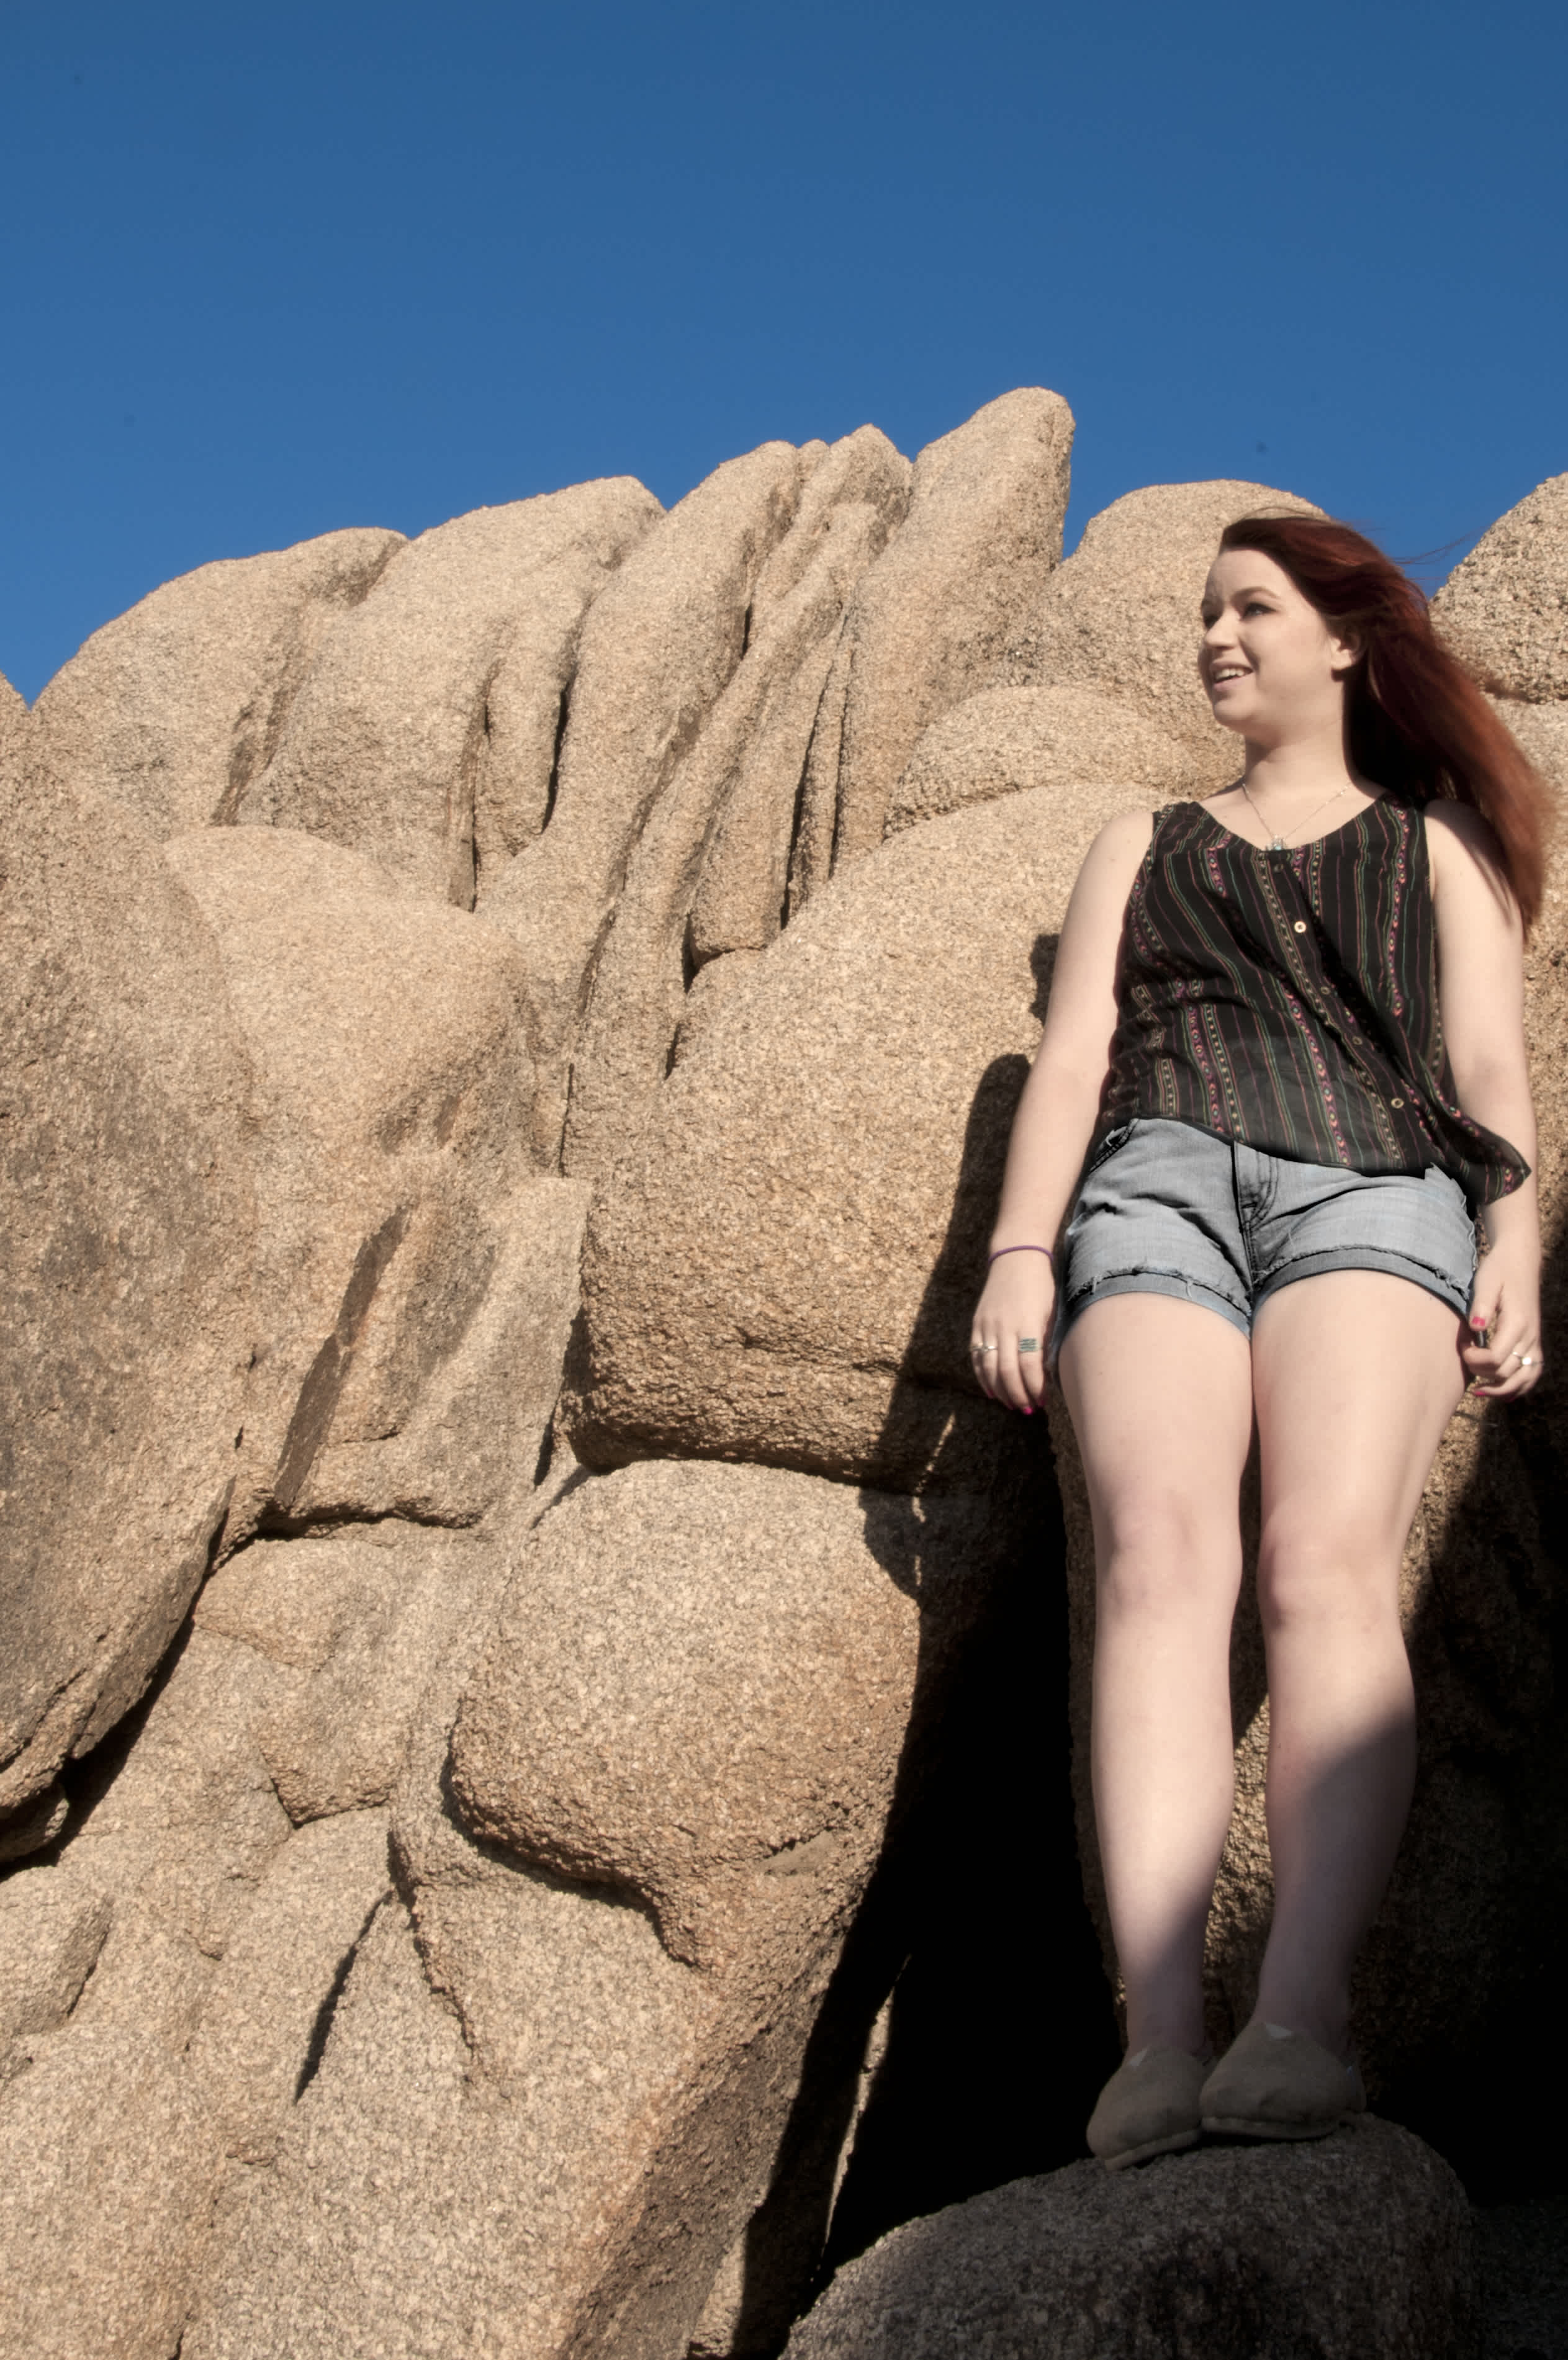 Girl in shorts standing against a pile of boulders.